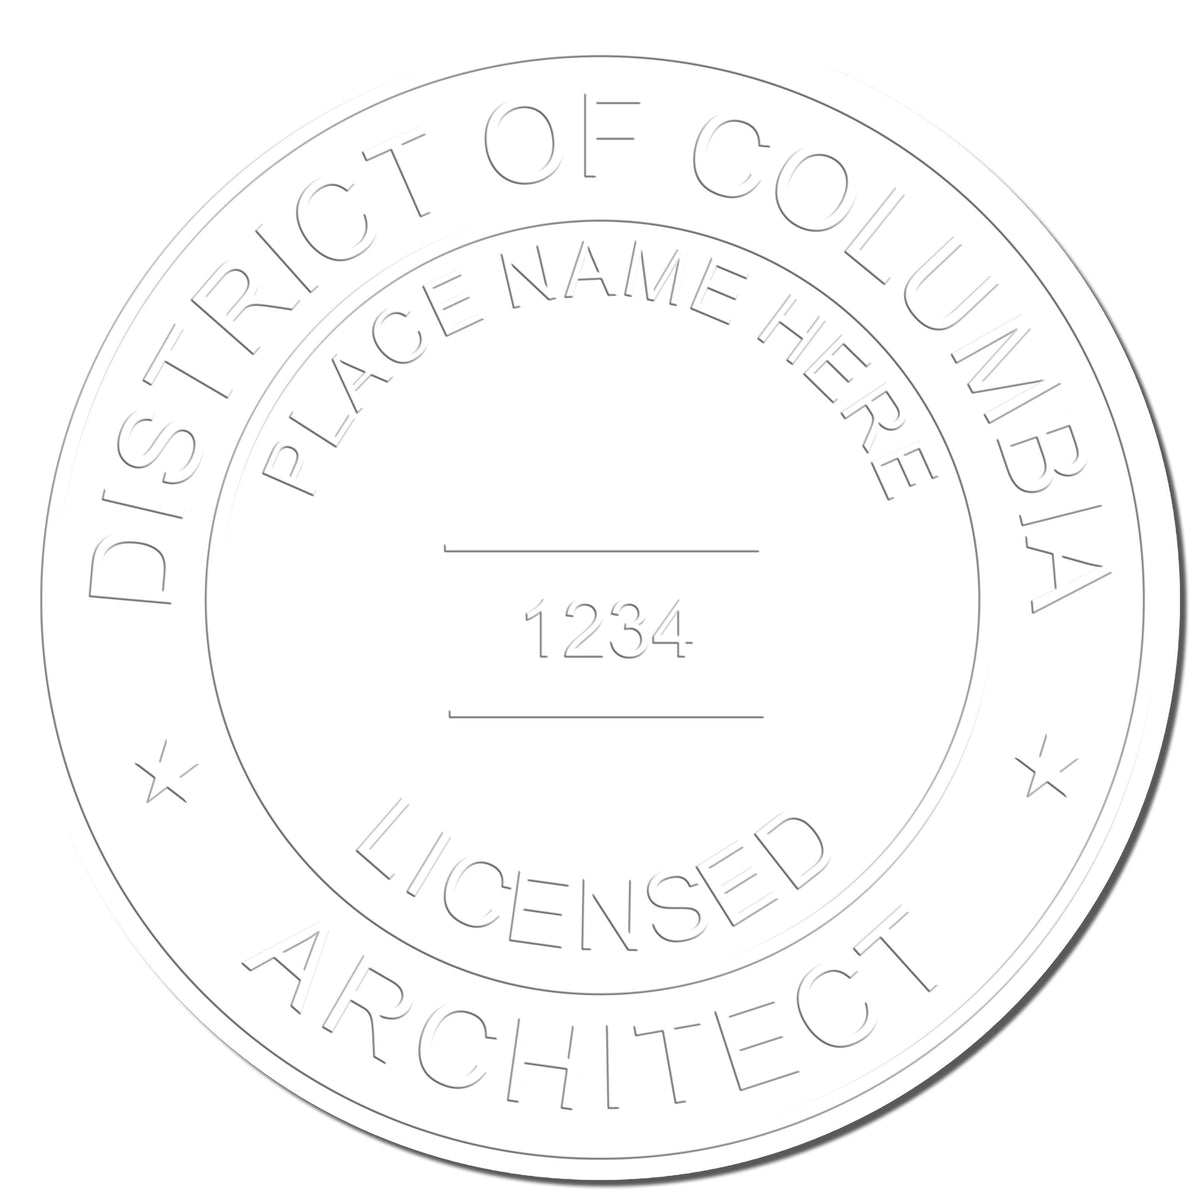 This paper is stamped with a sample imprint of the District of Columbia Architectural Seal Embosser, signifying its quality and reliability.